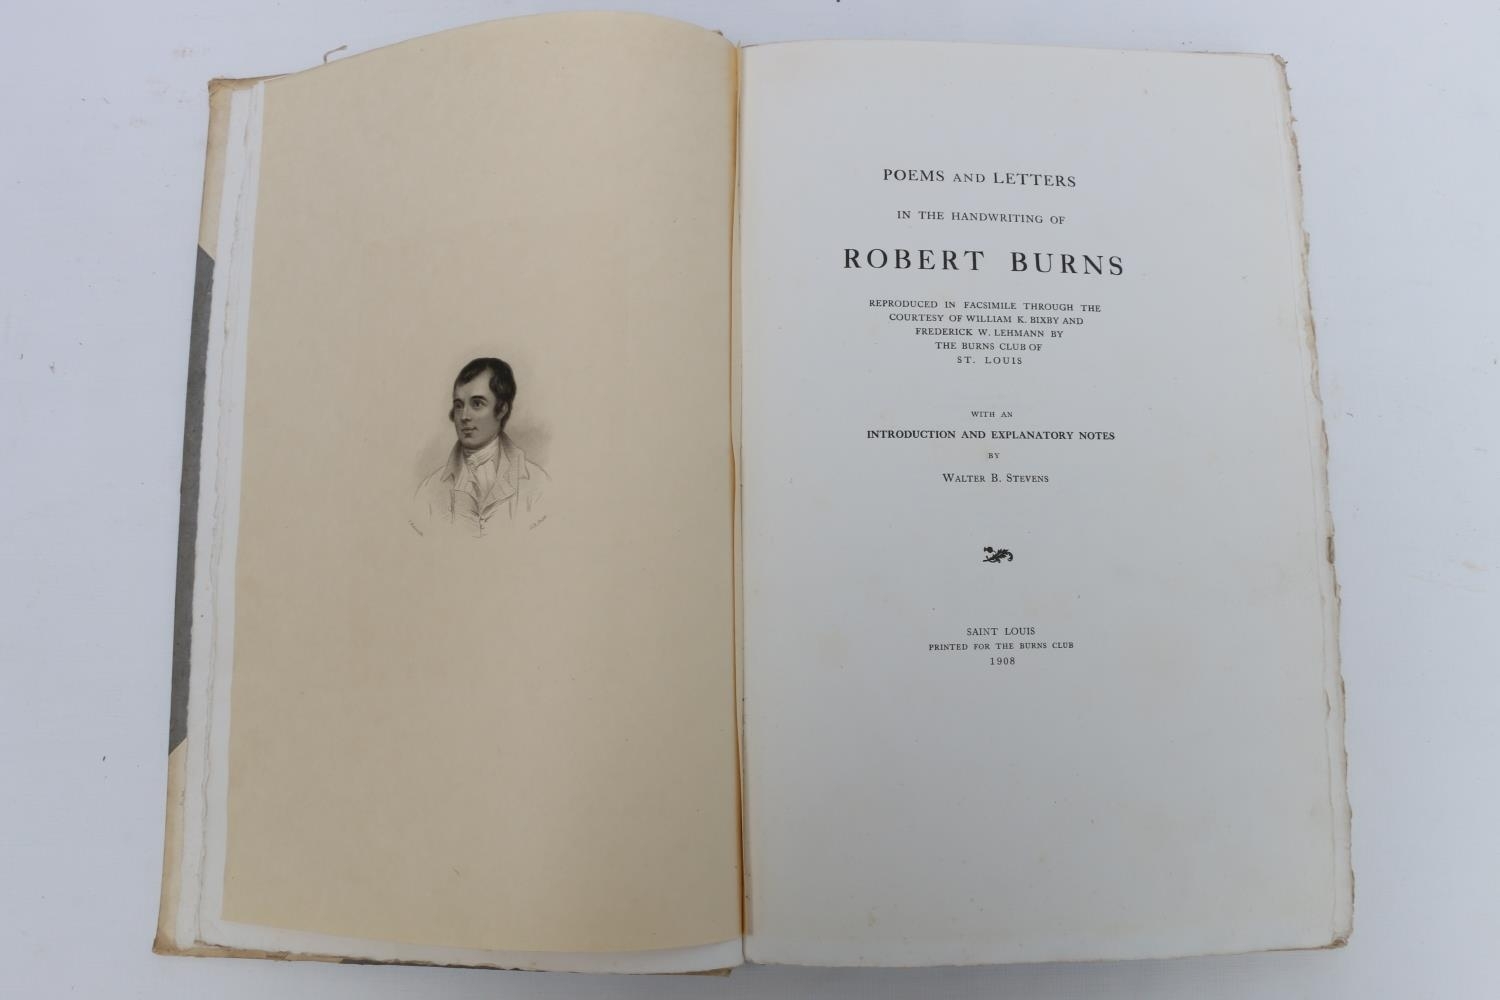 Artwork by Robert Burns, Poems and Letters in the Handwriting of Robert Burns with notes by Walter B Stevens